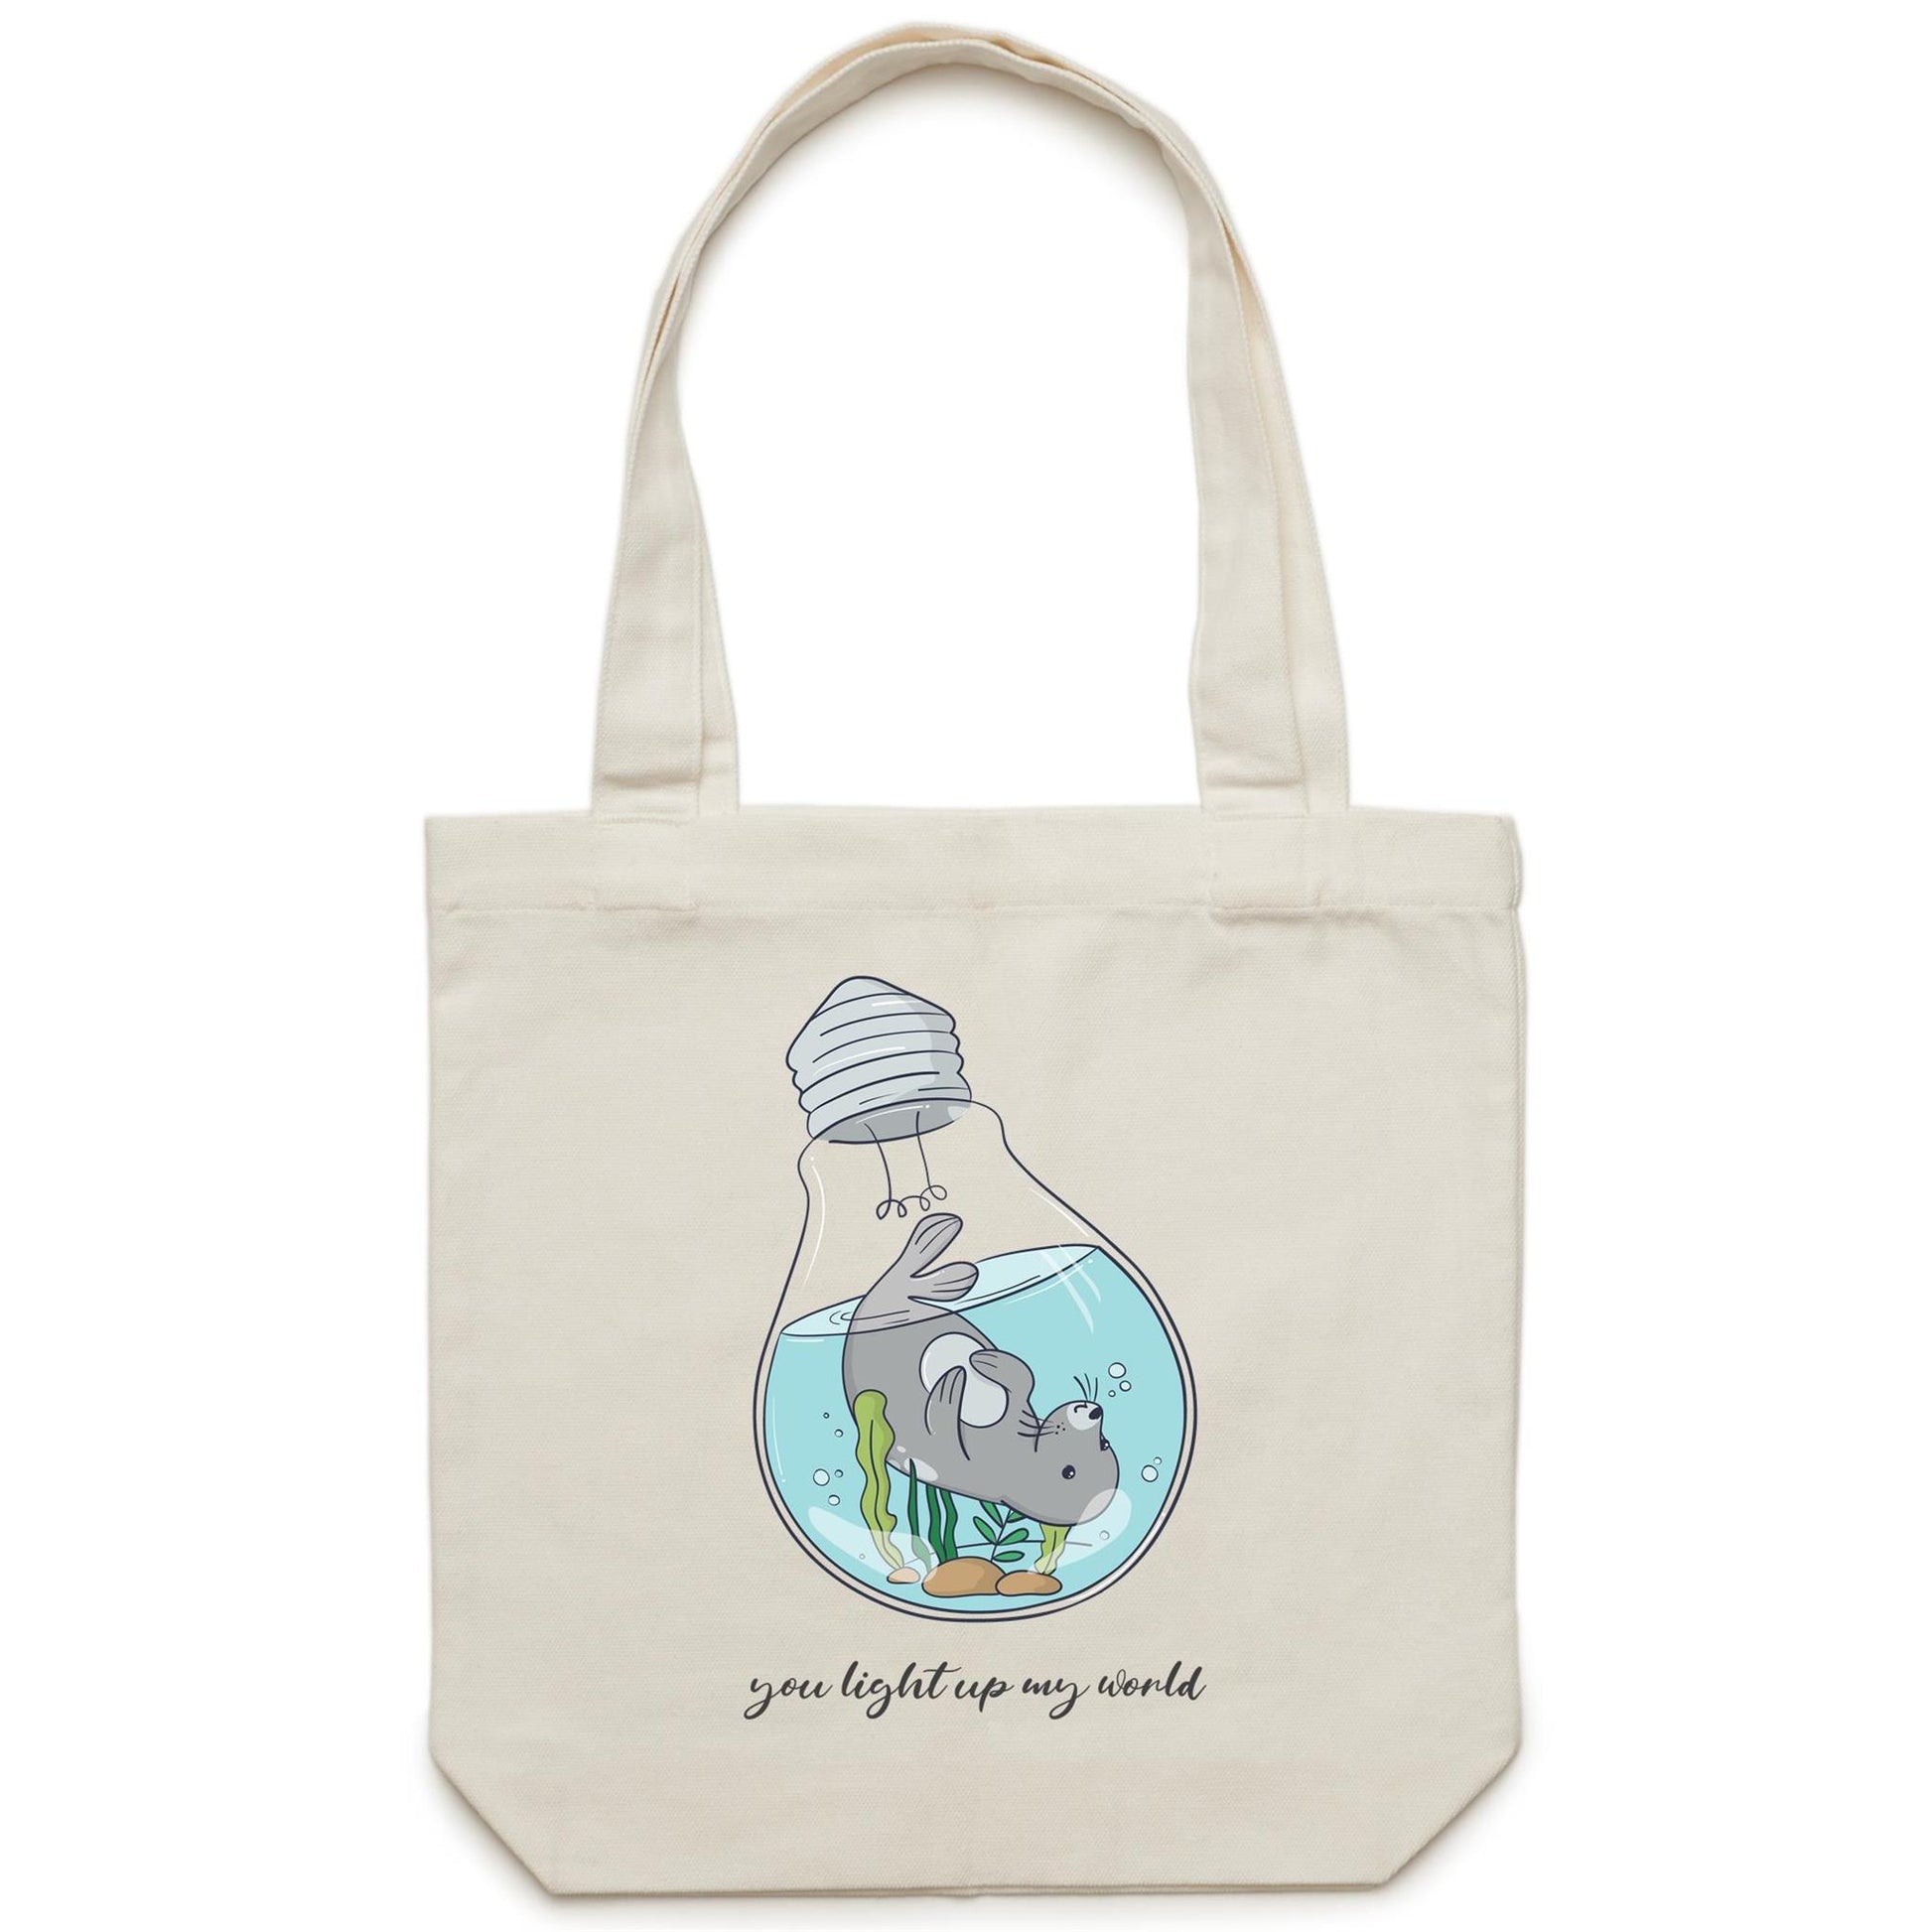 You Light Up My World - Canvas Tote Bag Default Title Tote Bag animal